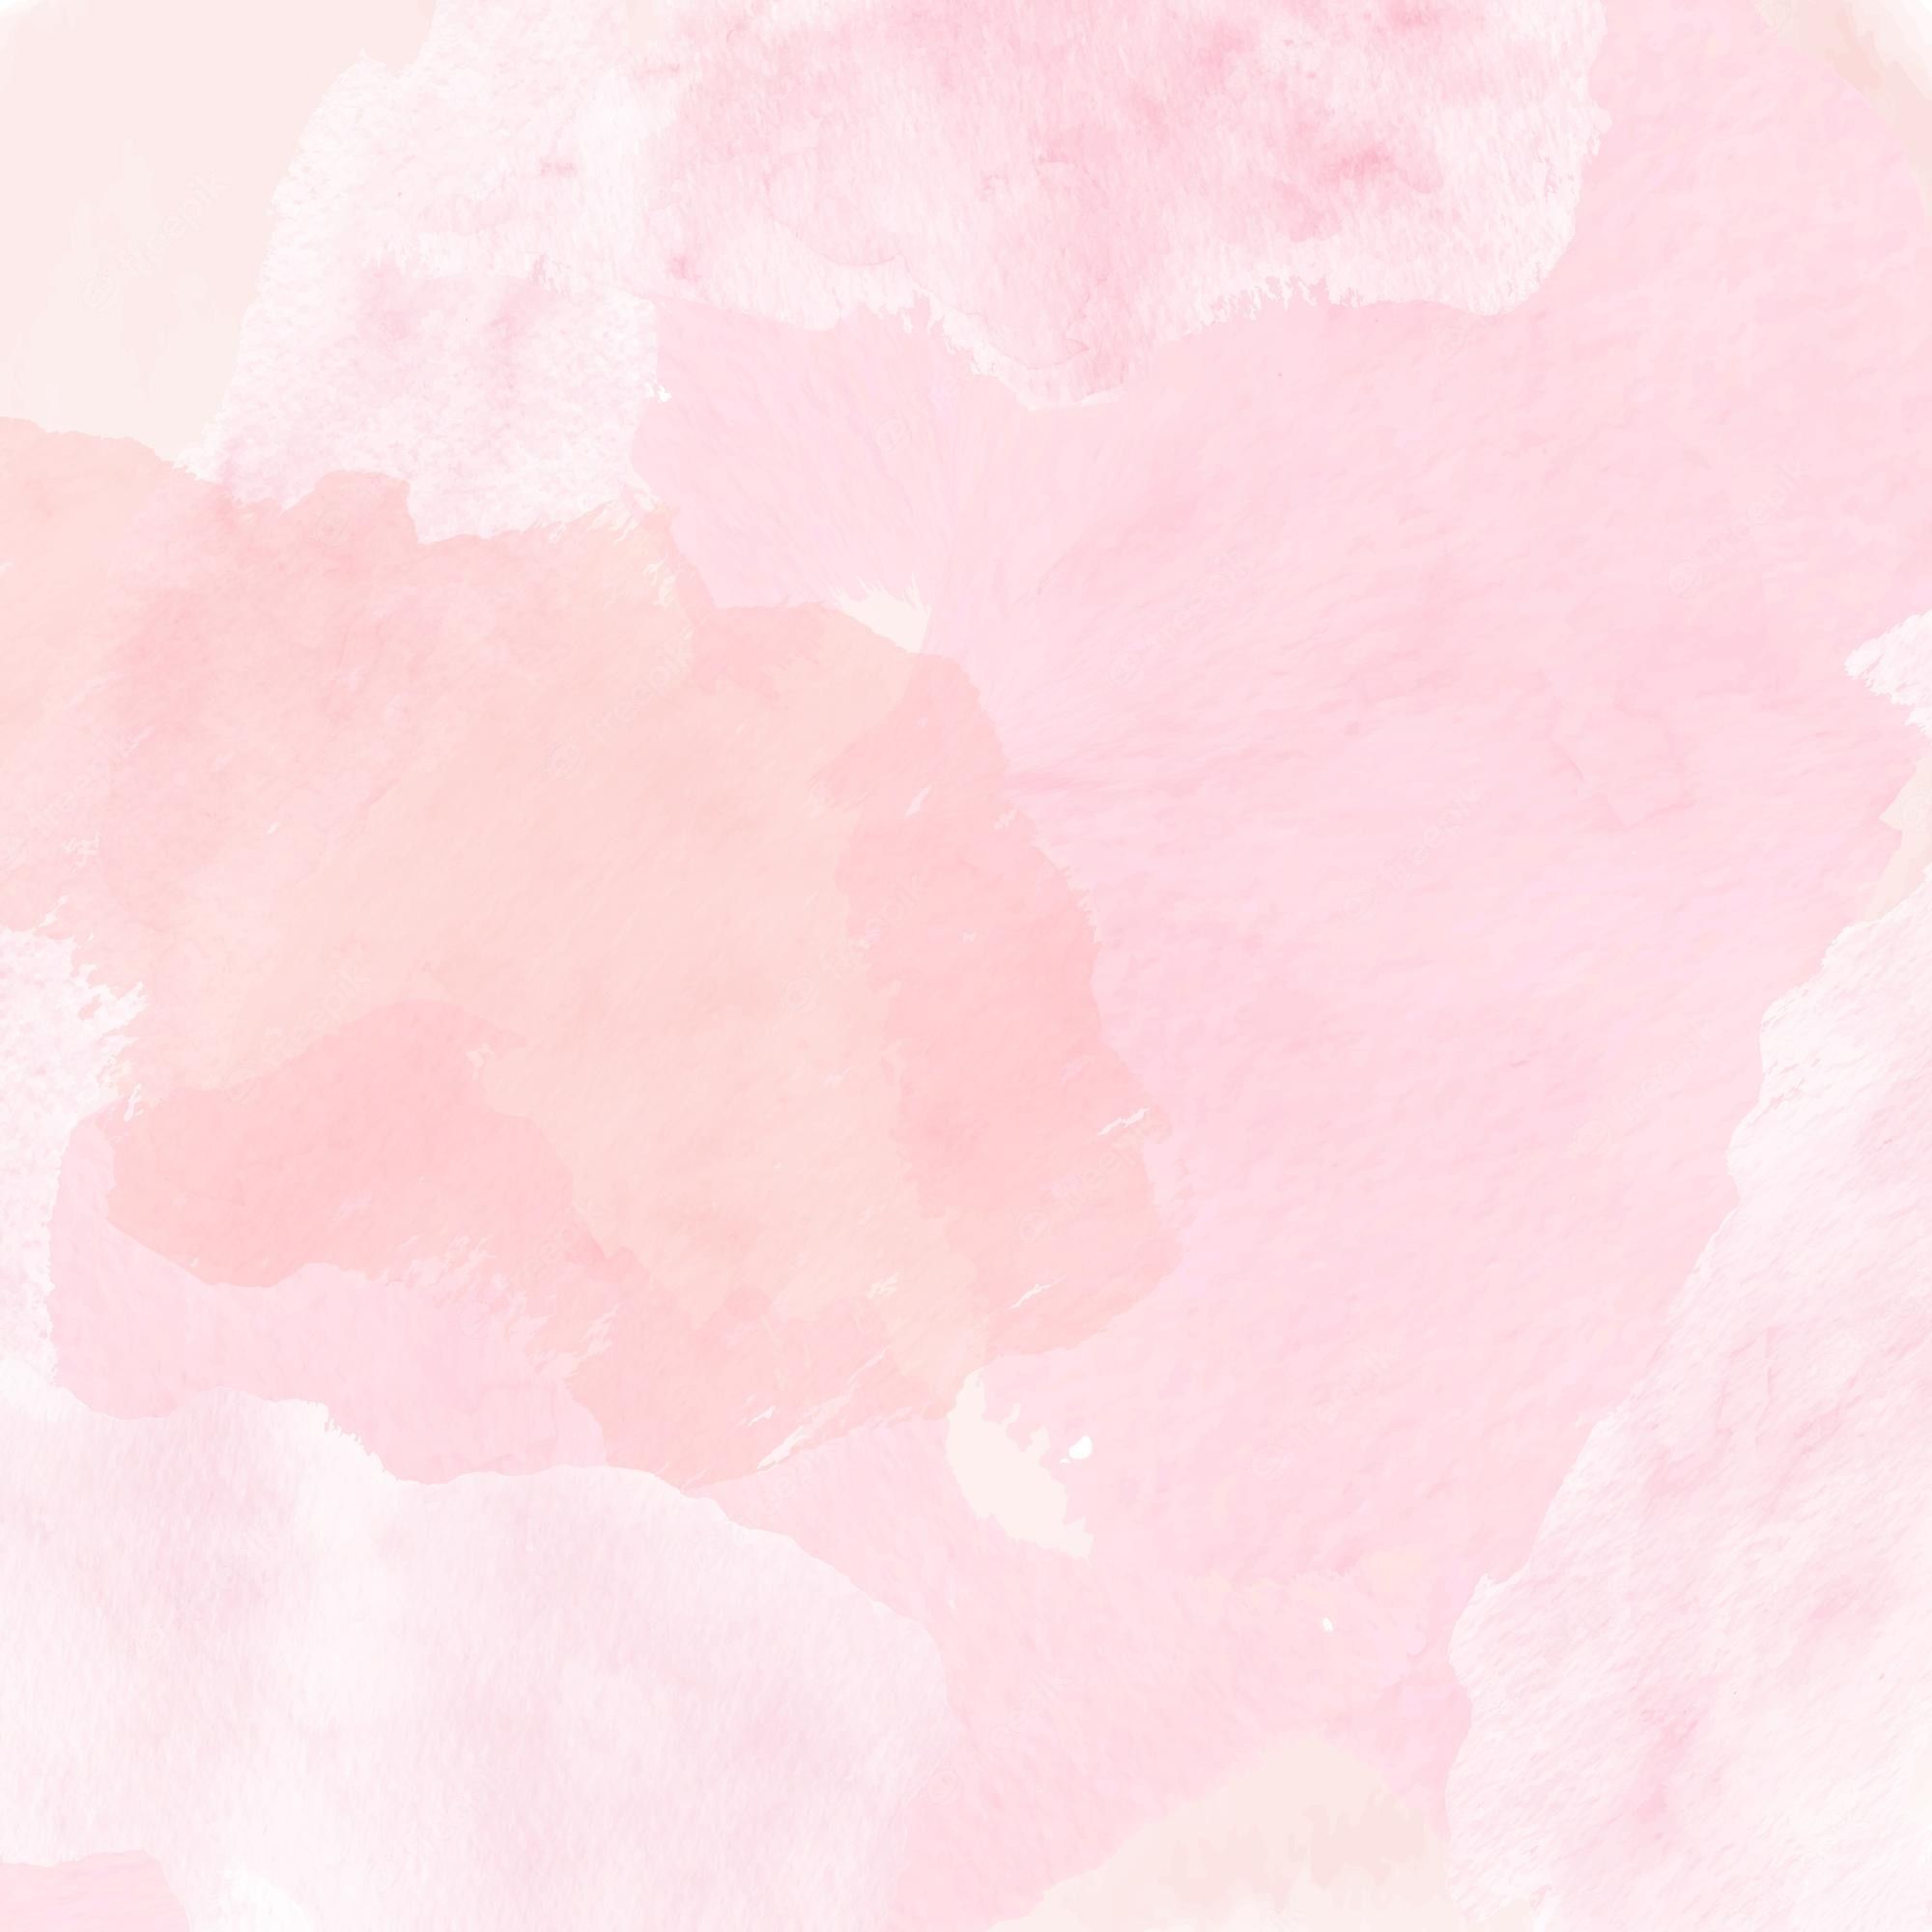 A pink watercolor background with white and gray - Blush